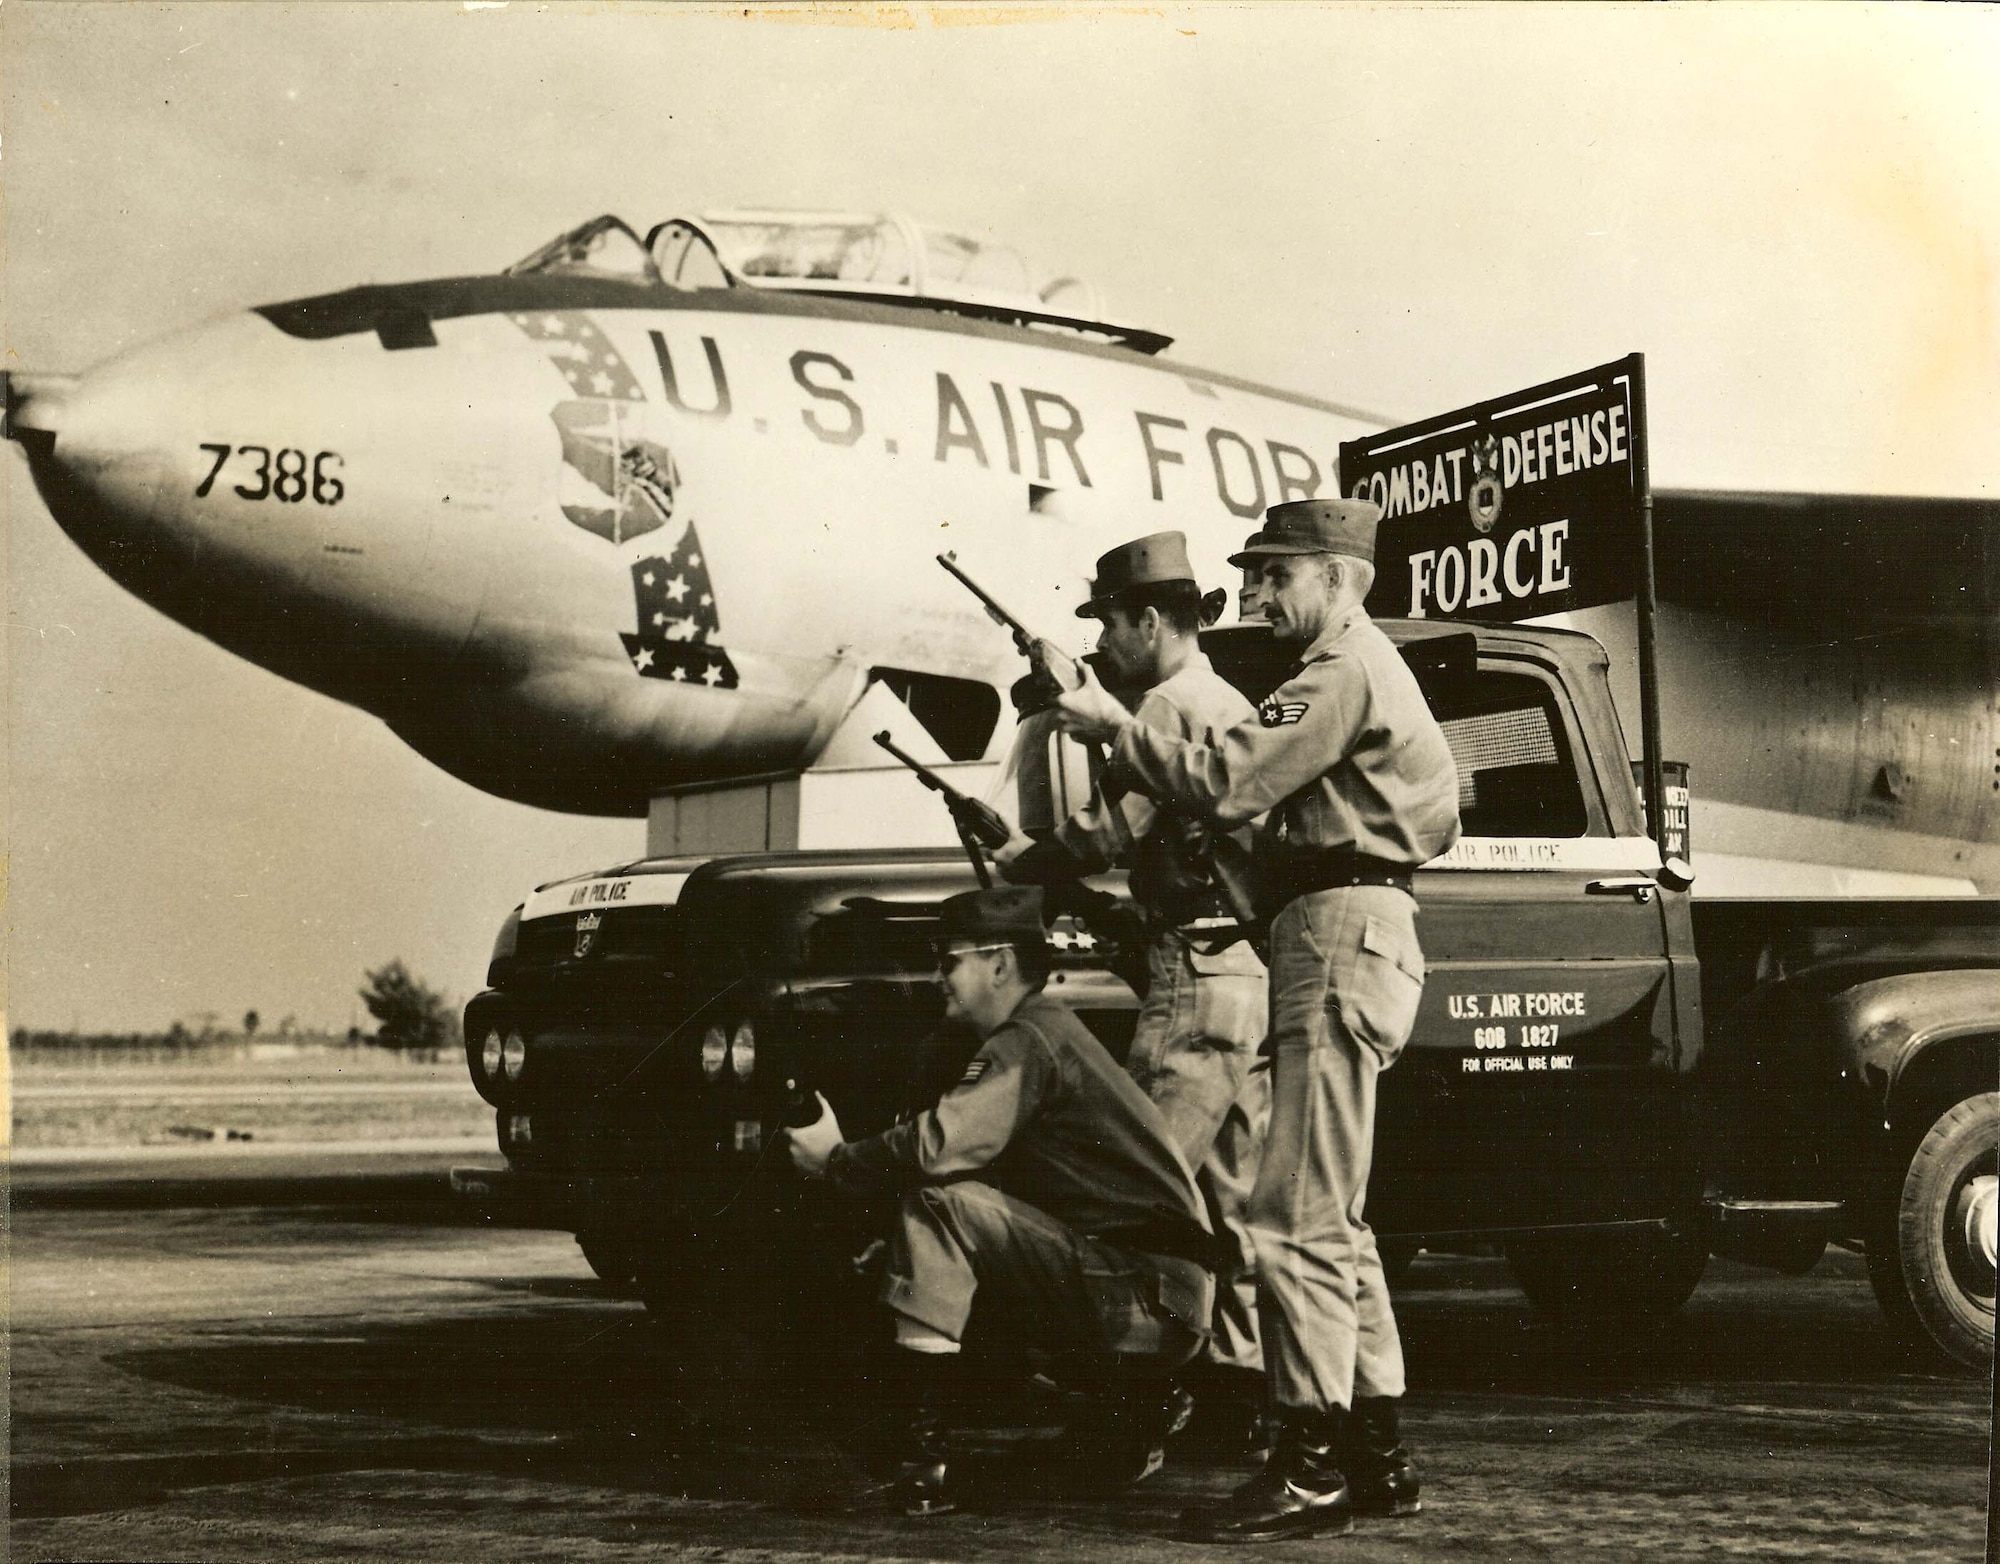 Going back to the 1950s, MacDill Air Force Base, Fla. was a member of U.S. Strategic Command's ancestor, Strategic Air Command. From MacDill’s runways, the courageous Airmen of that time launched the then-new strategic bomber, the swept-wing B-47 Stratojet, which took off with a loud roar and massive exhaust plumes. (Courtesy photo)